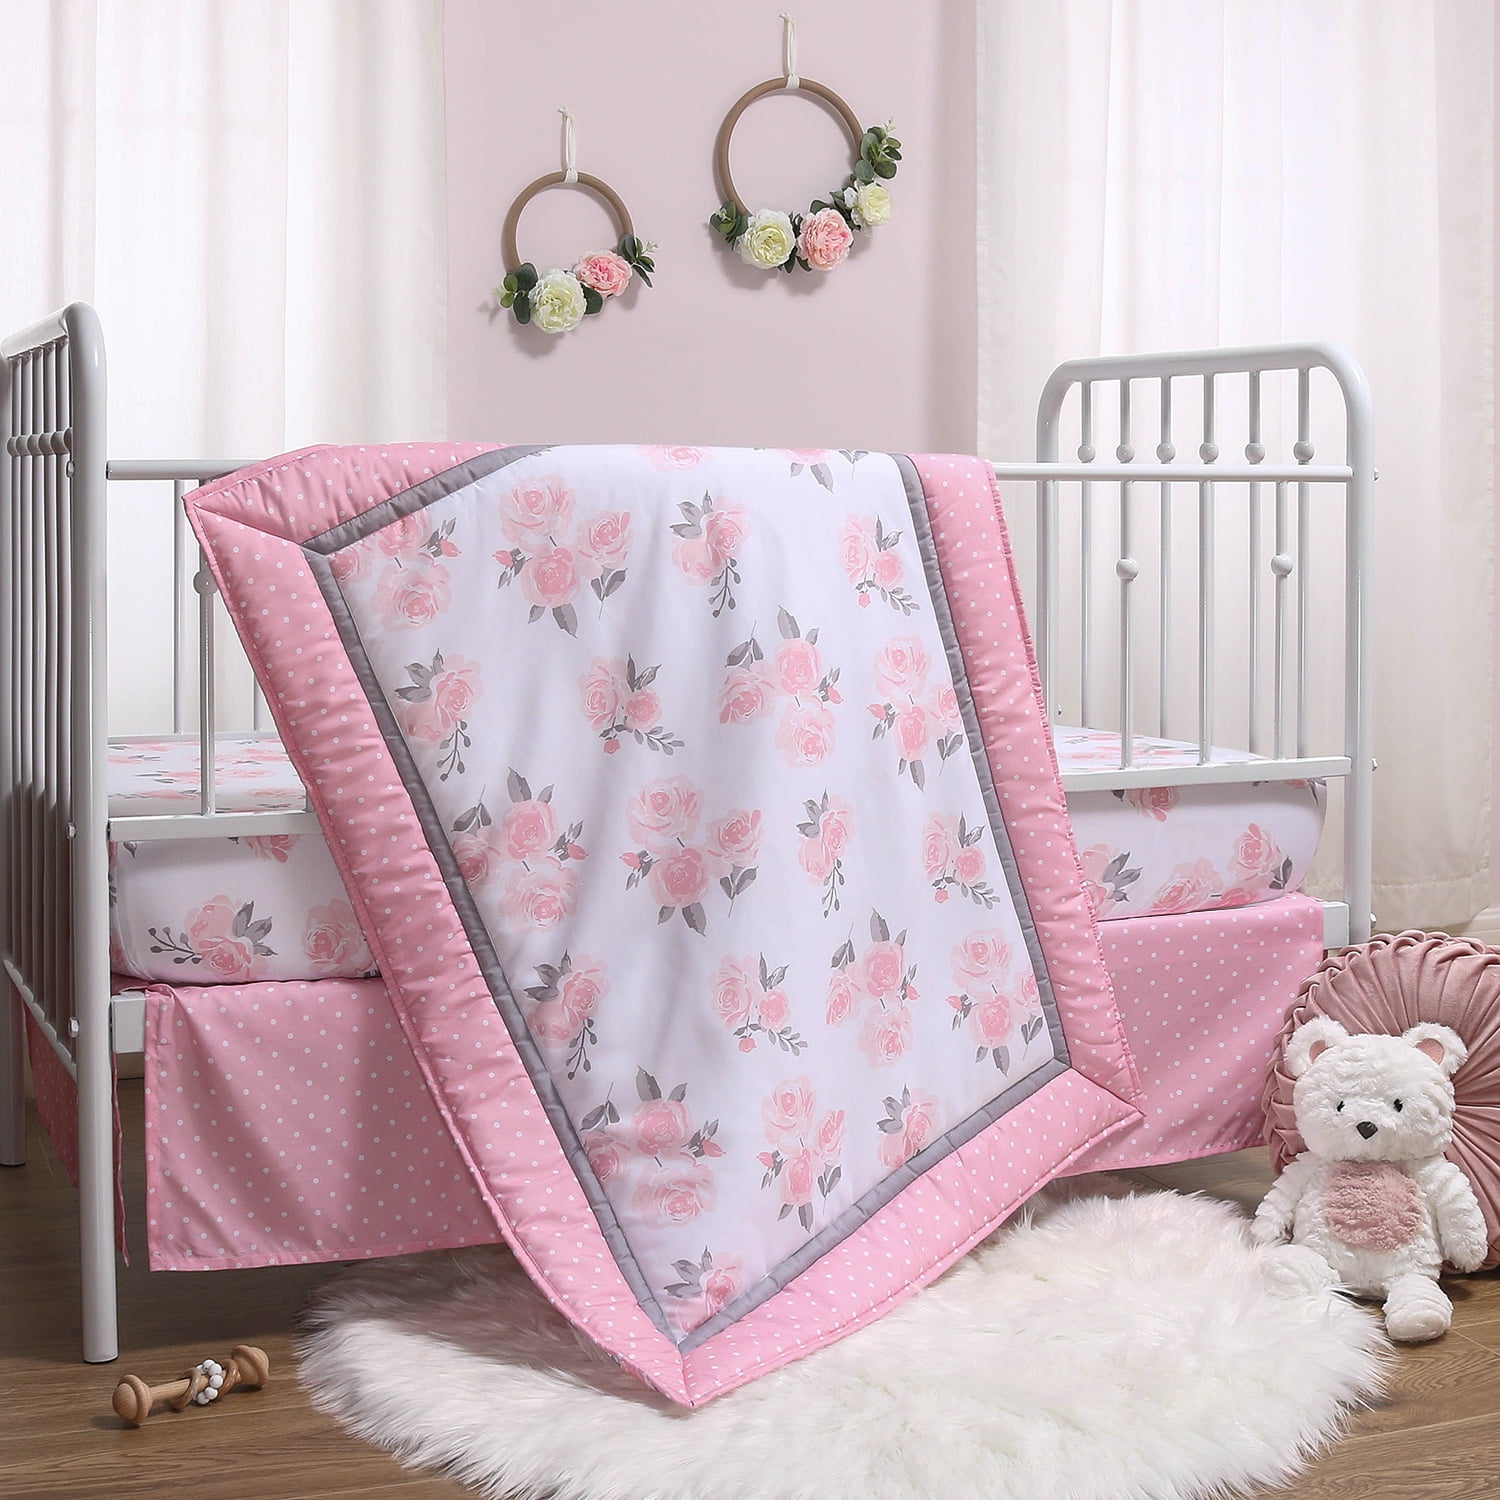 Floral Punch & Solid Pink 4 Pack Set The Peanutshell Floral & Blush Pink Fitted Crib Sheet Set for Baby Girls 